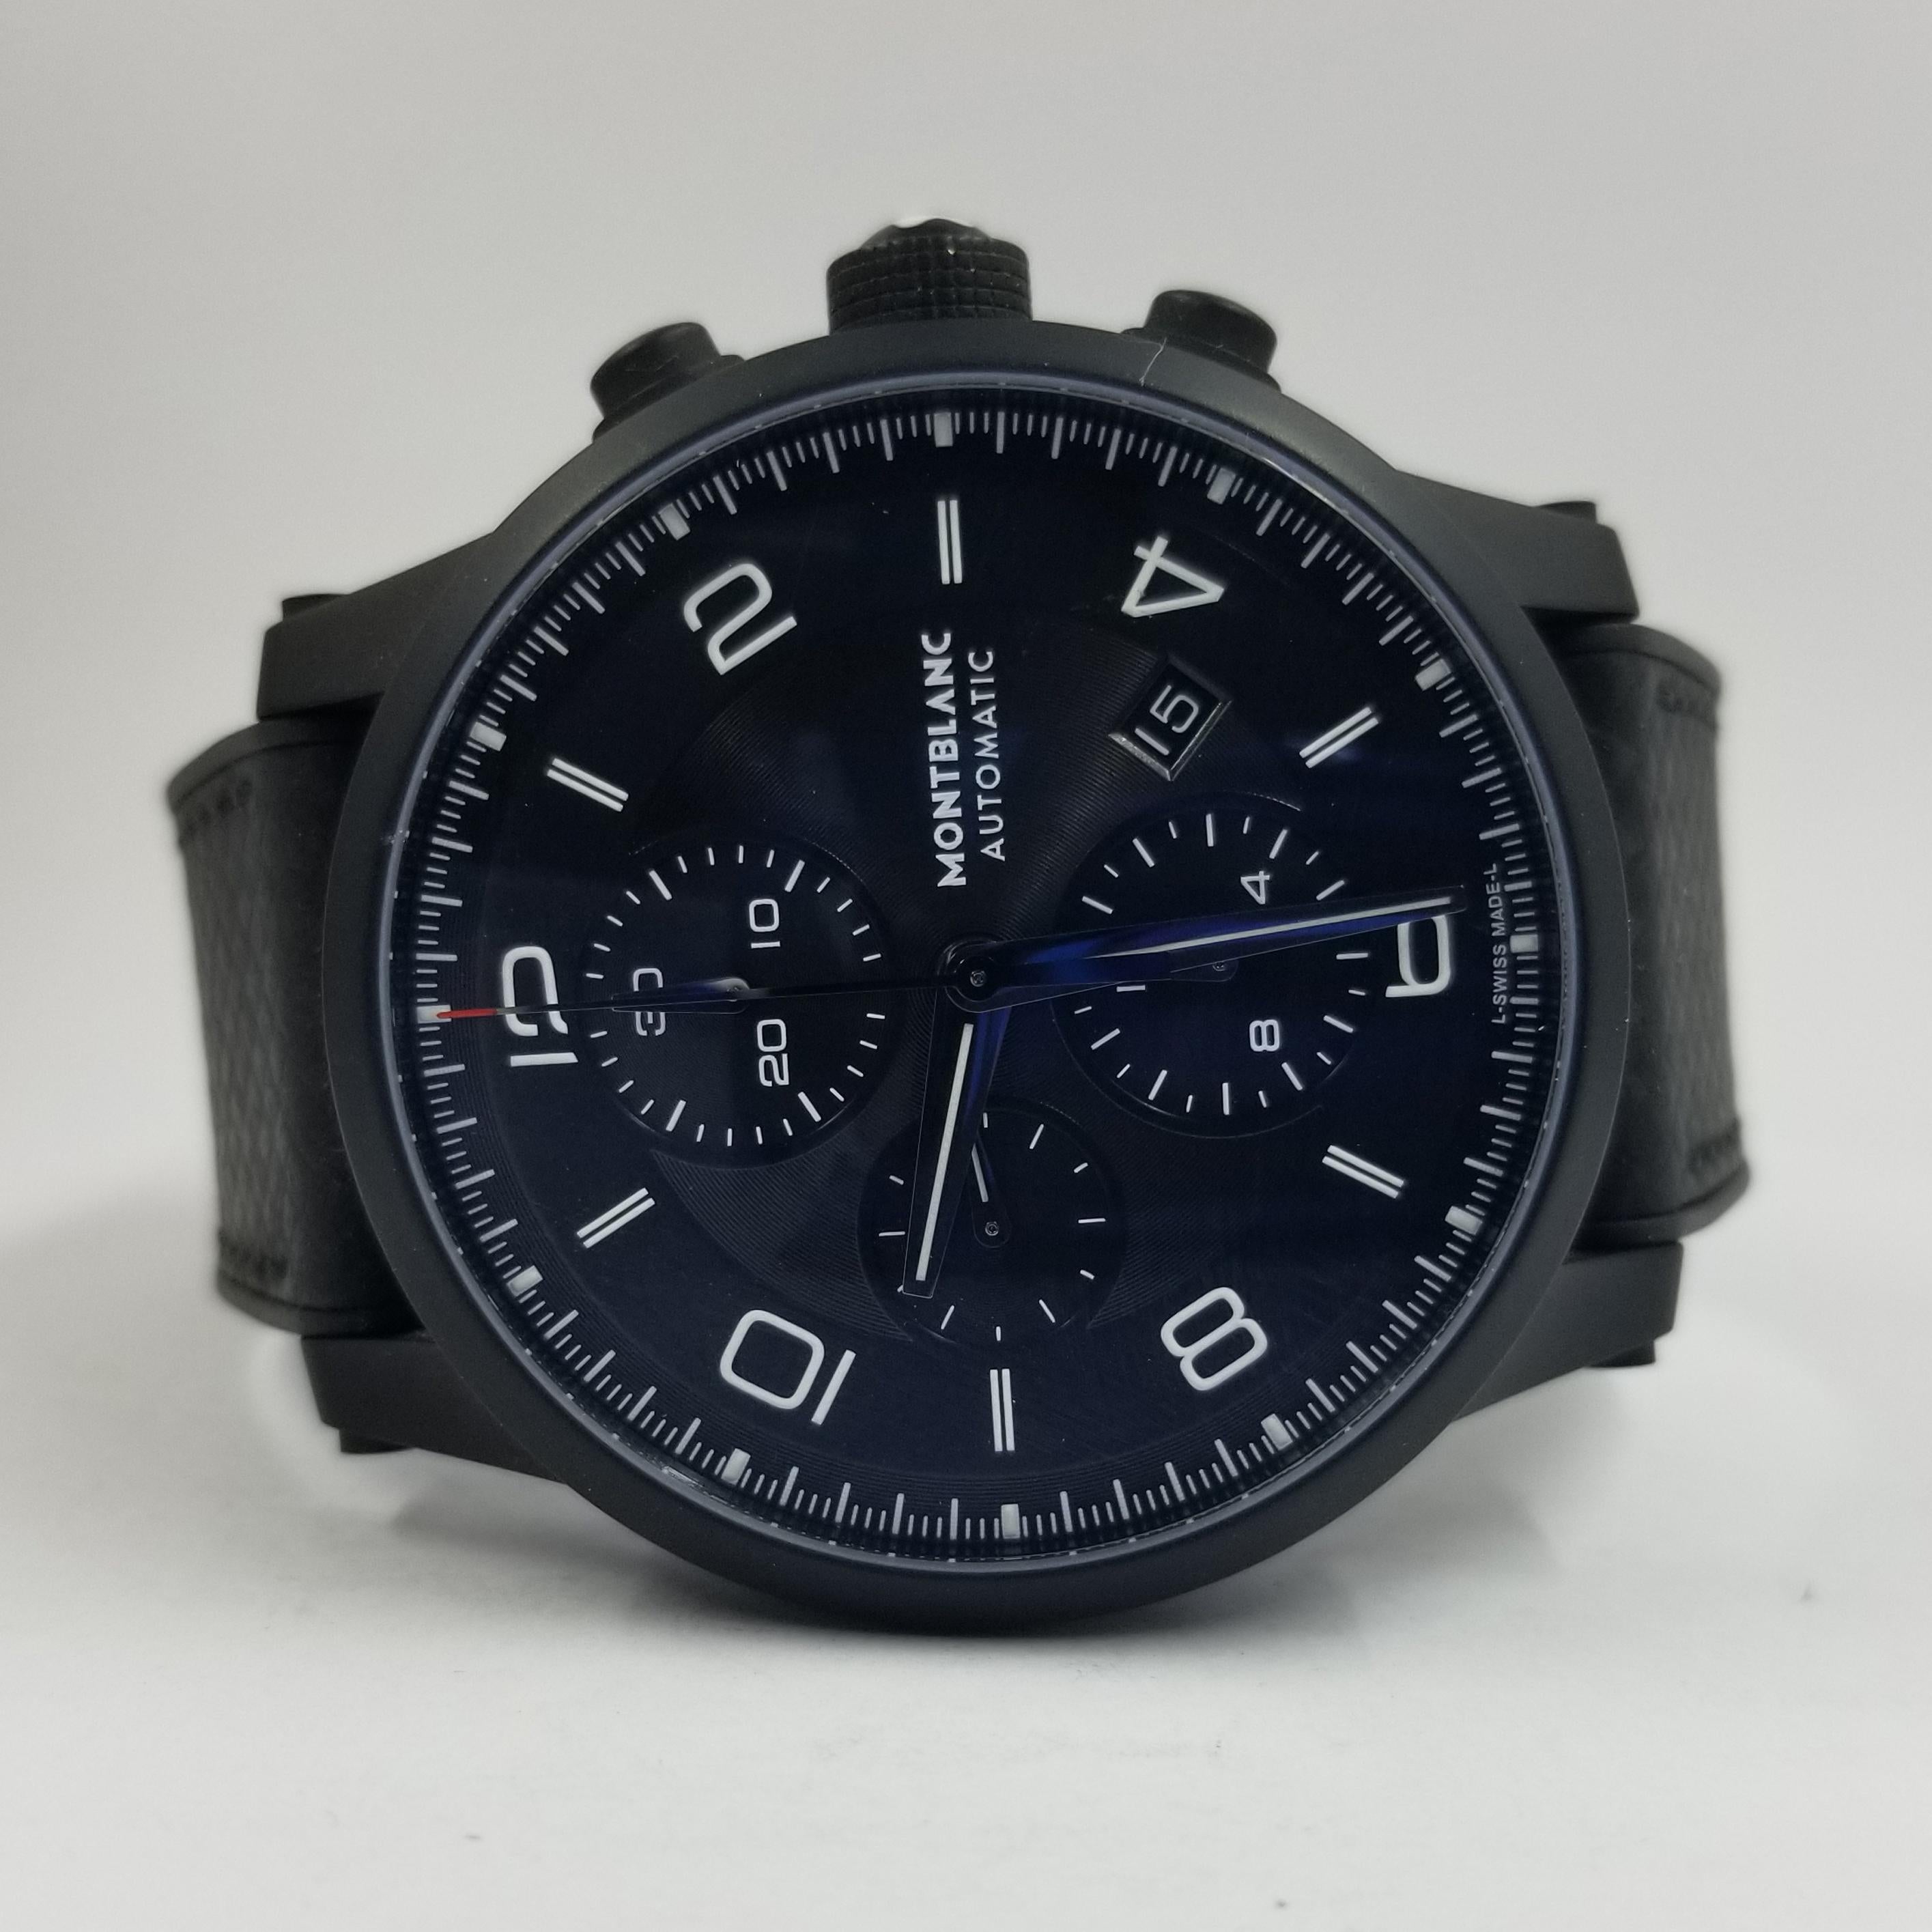 NEW Montblanc Wristwatch in DLC (Coated) Stainless Steel
$6,400 MSRP
Timewalker Collection Automatic Chronograph with Date Function
43MM Black DLC Stainless Steel Case with Black Dial and White Indicators
Scratch resistant Sapphire Crystal
Rubber